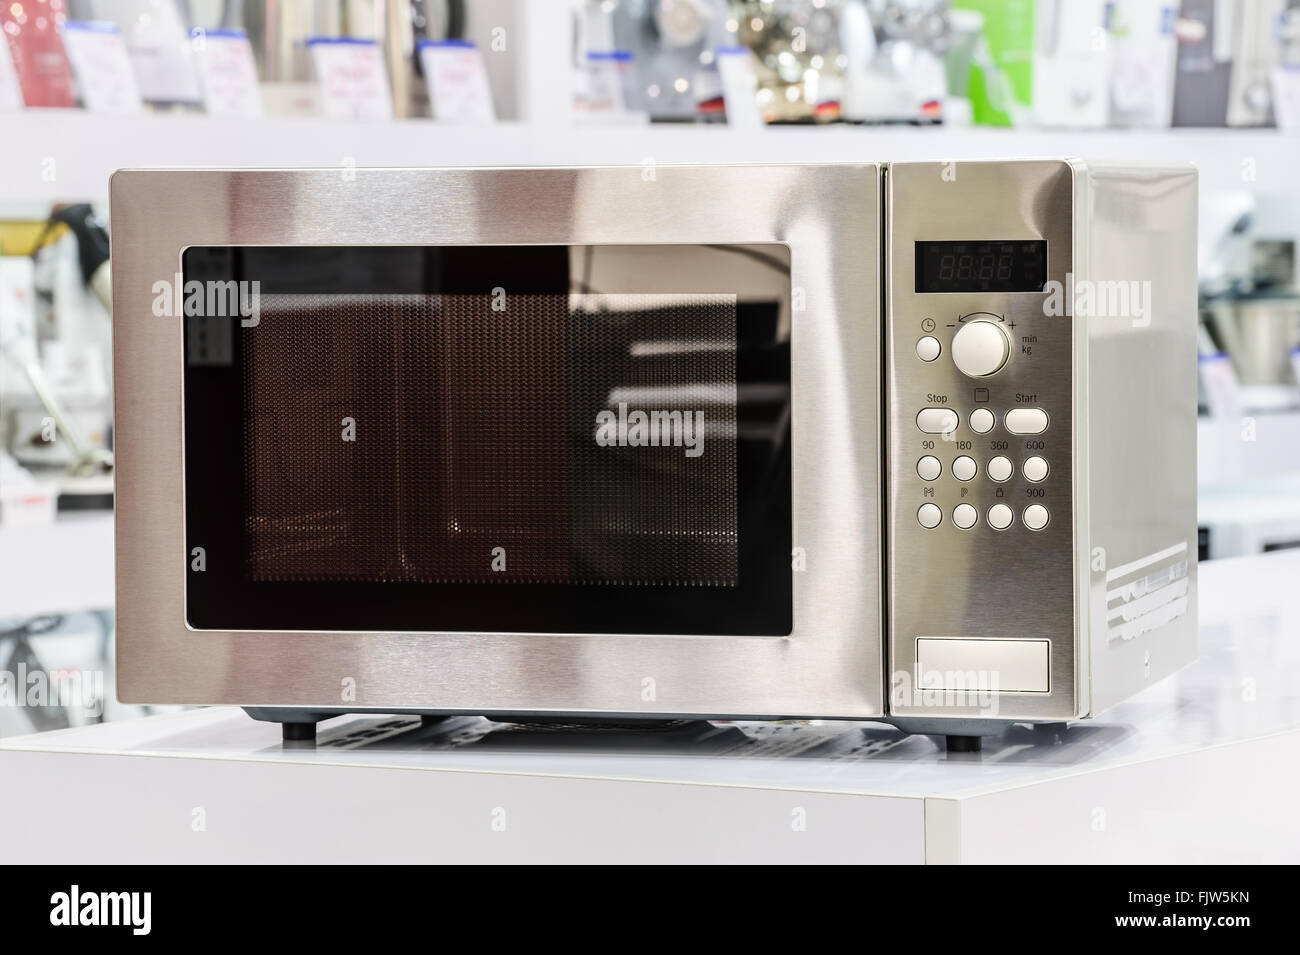 microwave oven in retail store Stock Photo